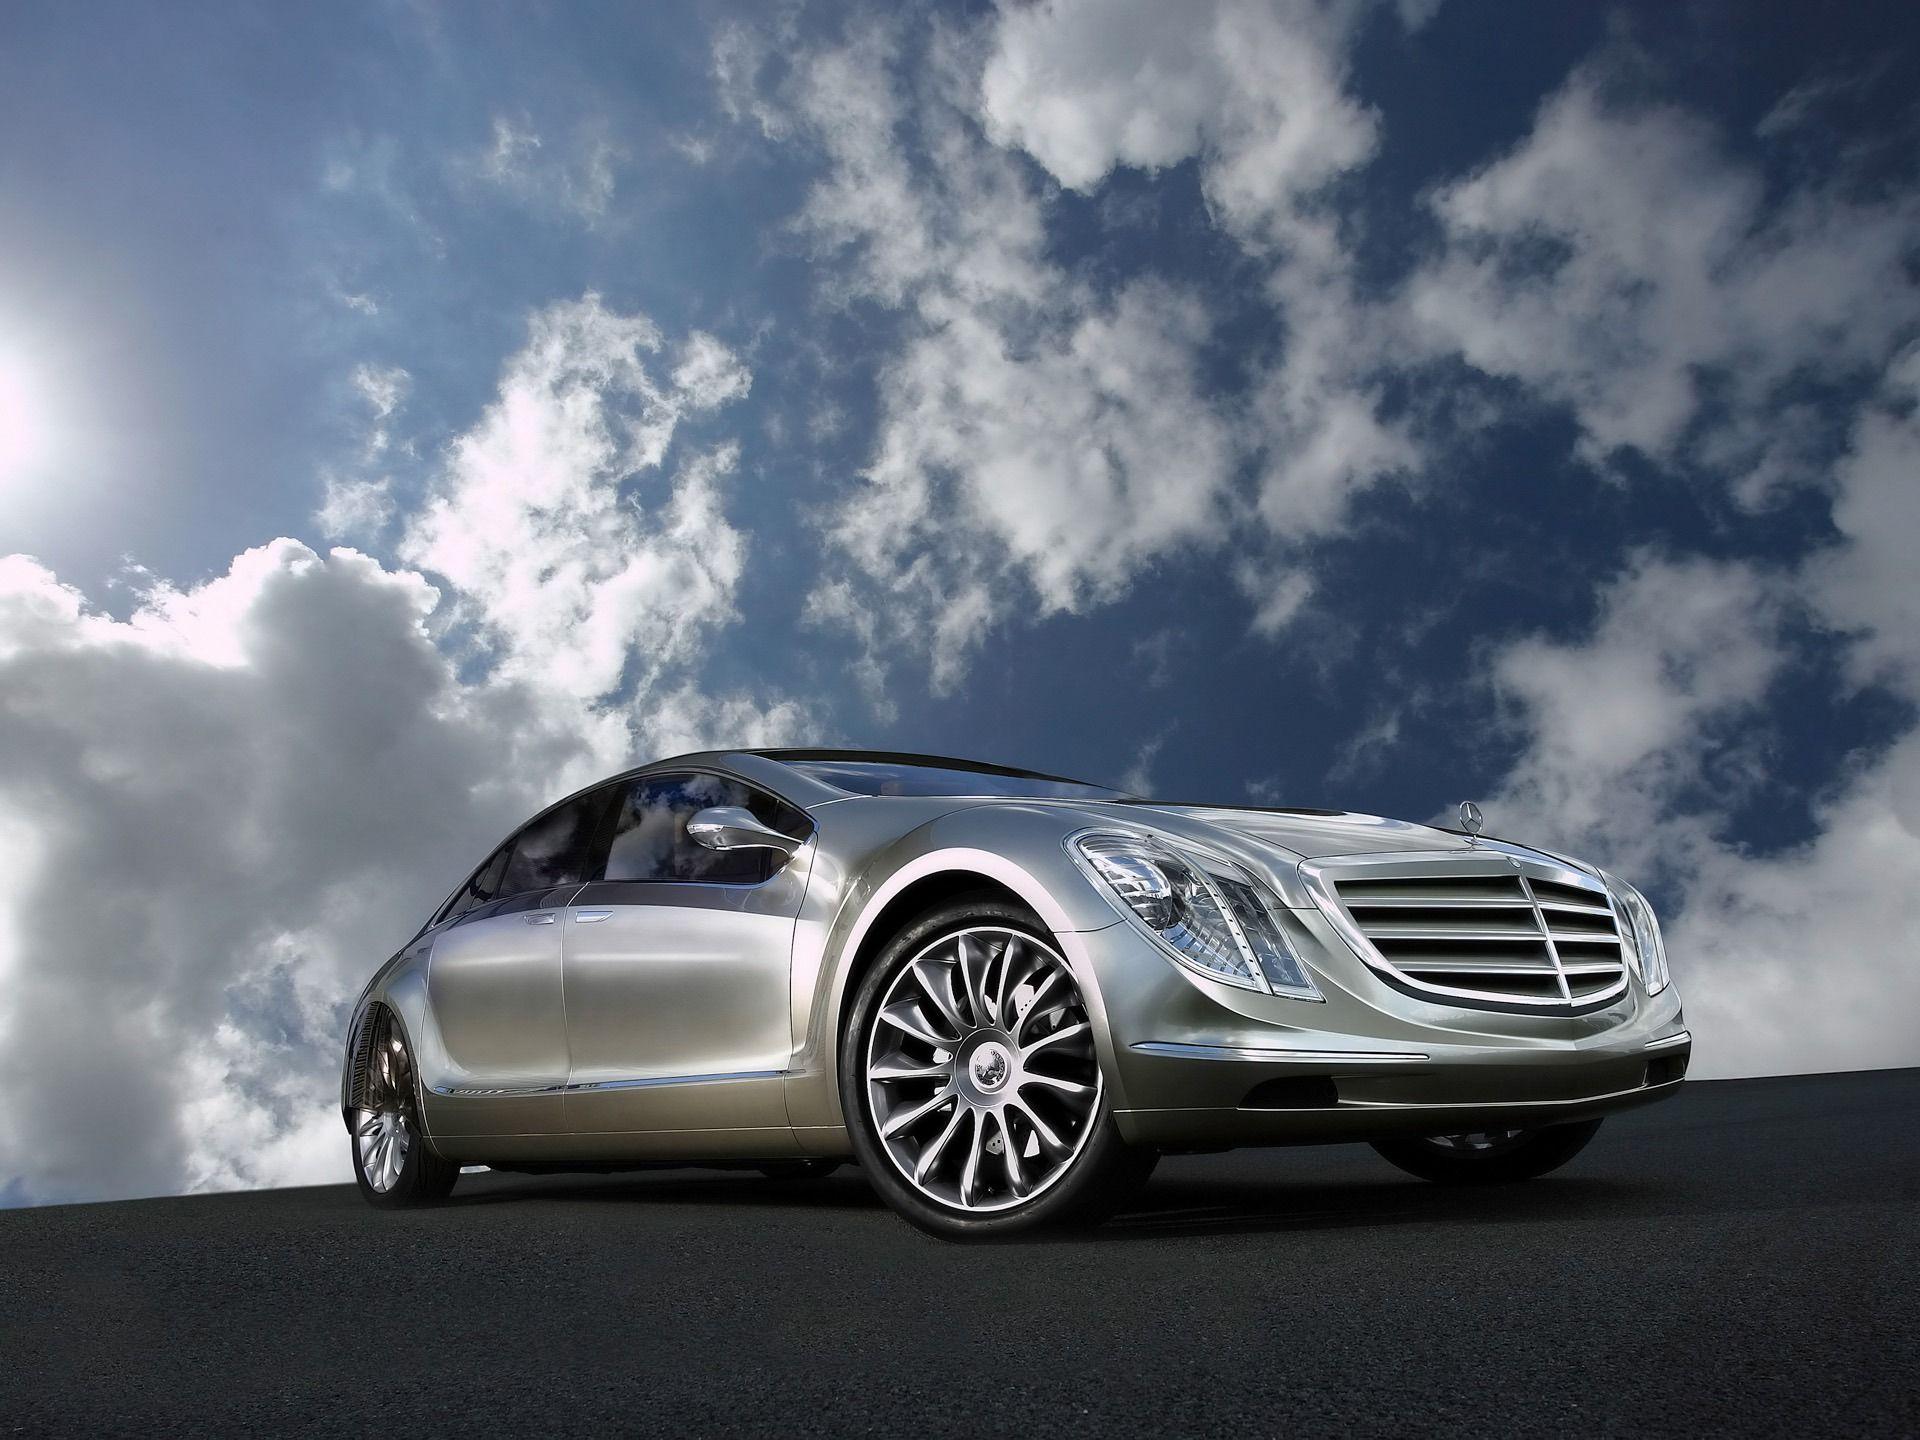 HD Mercedes Benz Wallpapers Group